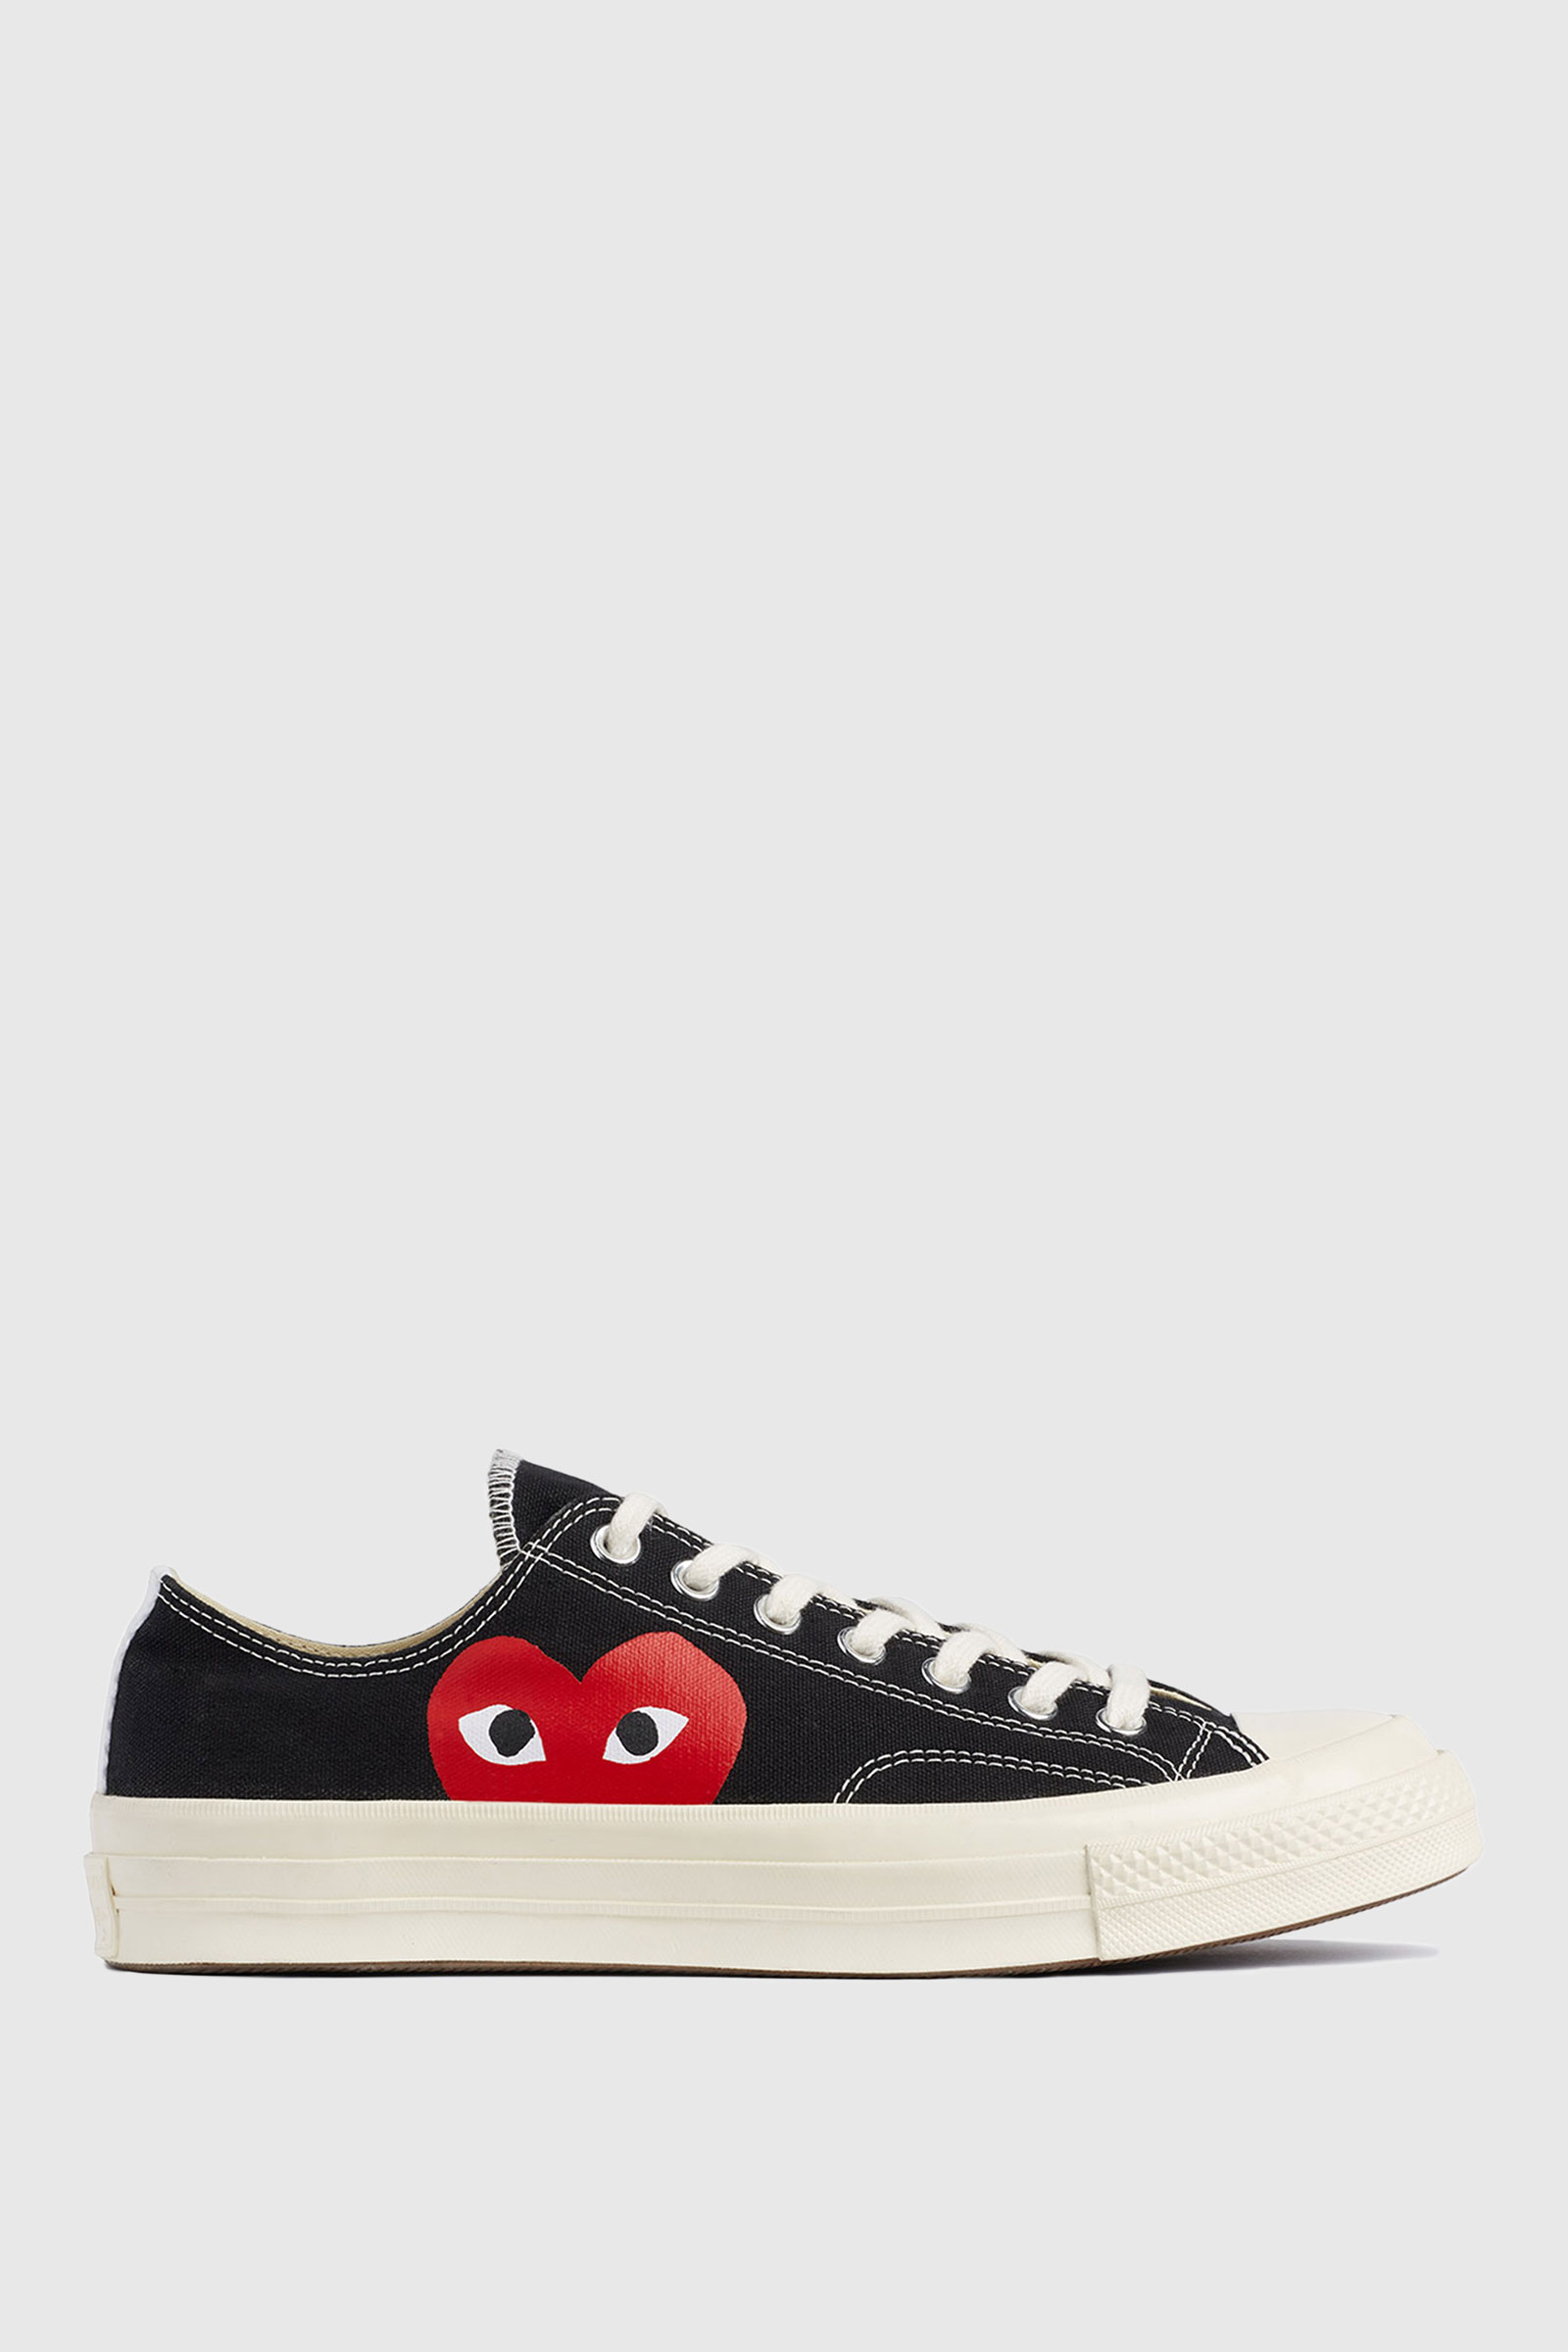 comme converse play